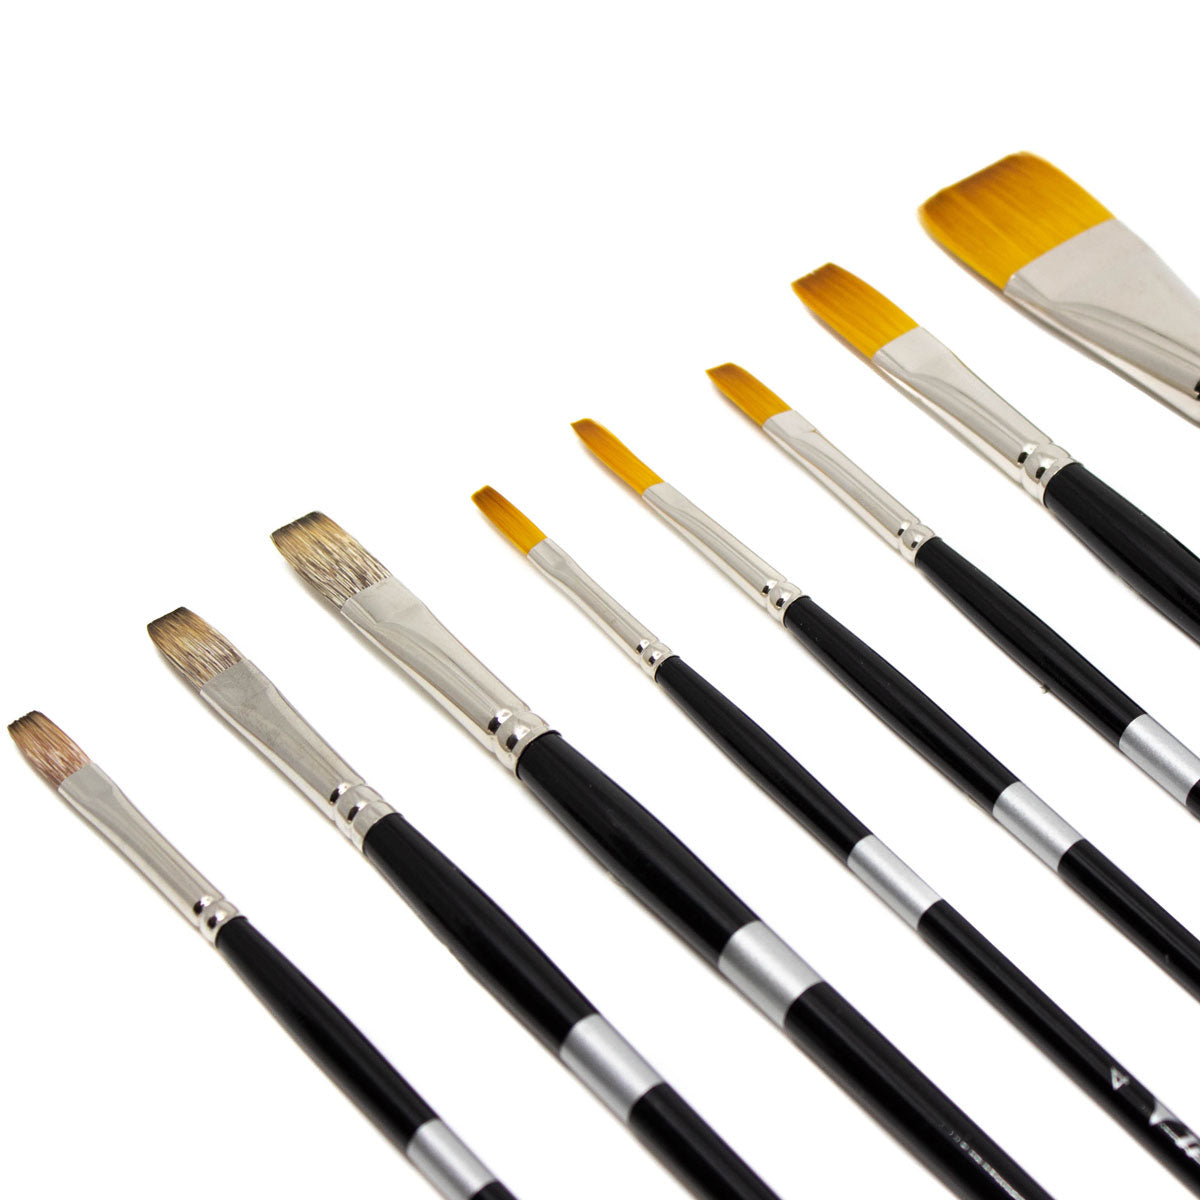 Bryan Mark Taylor's Sentient Brush Sets Trekell Art Supplies Synthetic Vegan Friendly Brushes for oil and acrylic paint